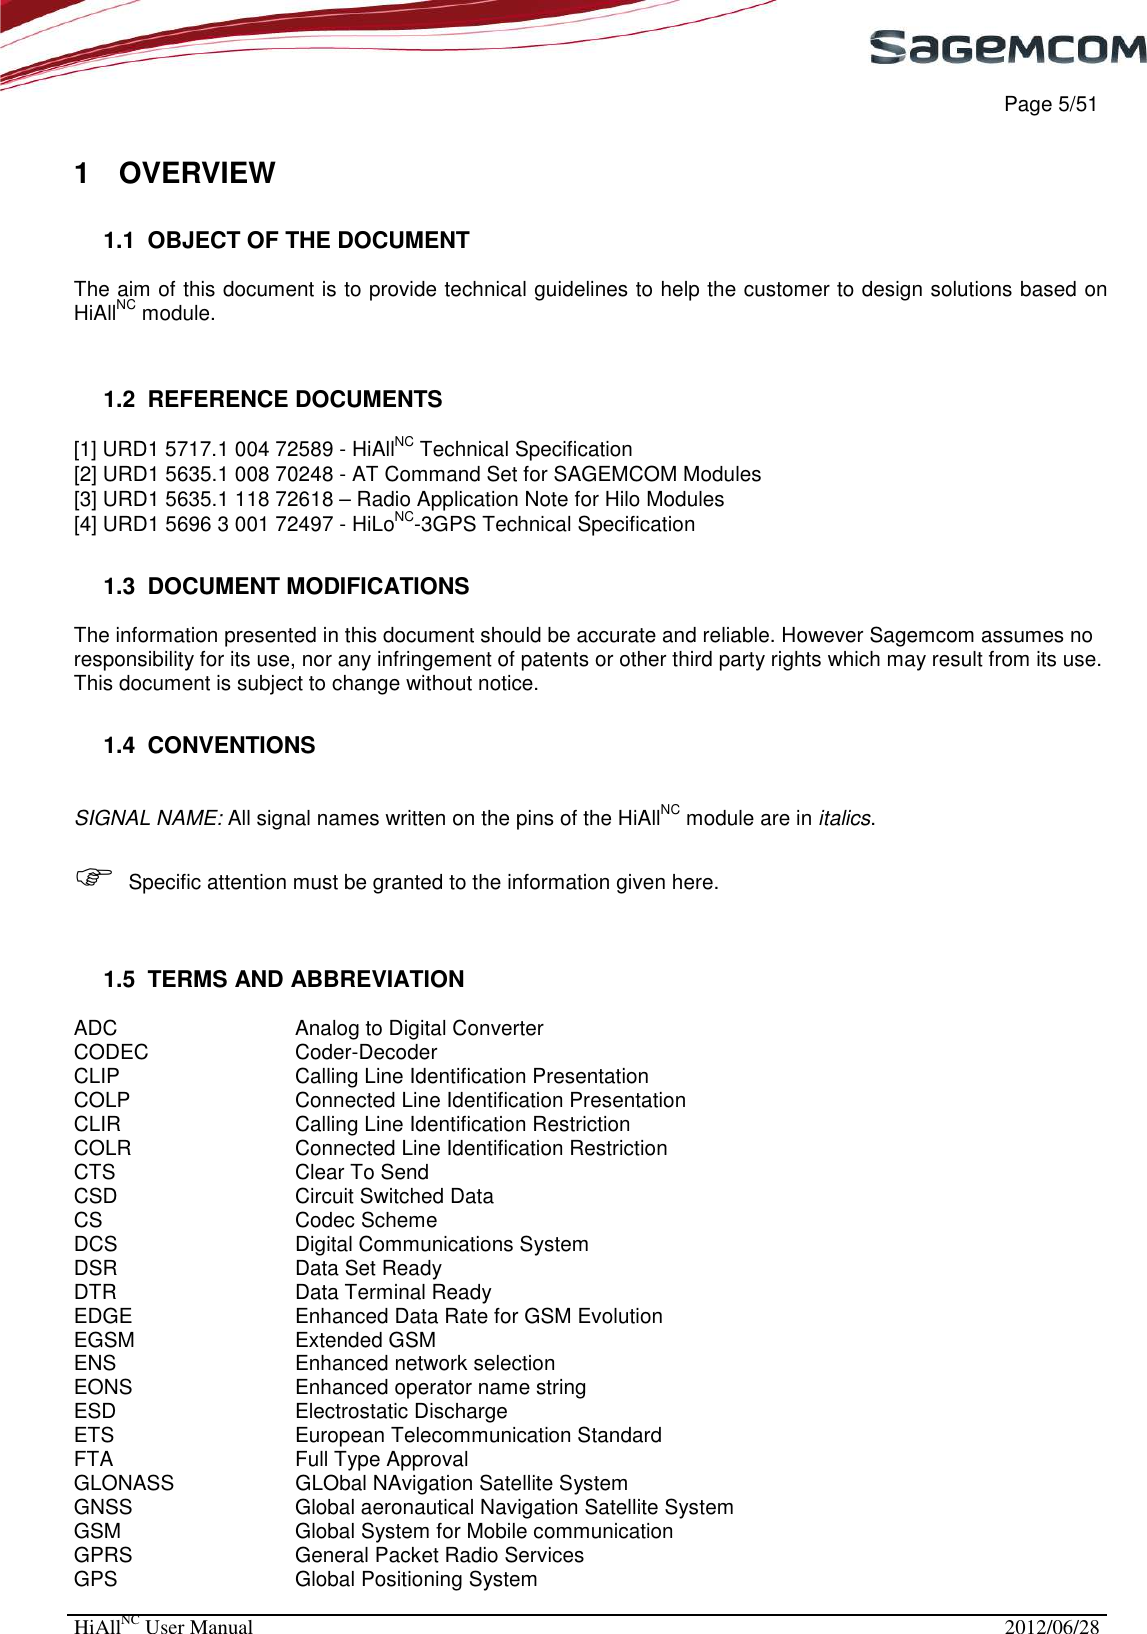     Page 5/51 HiAllNC User Manual  2012/06/28  1  OVERVIEW 1.1  OBJECT OF THE DOCUMENT  The aim of this document is to provide technical guidelines to help the customer to design solutions based on HiAllNC module.  1.2  REFERENCE DOCUMENTS [1] URD1 5717.1 004 72589 - HiAllNC Technical Specification [2] URD1 5635.1 008 70248 - AT Command Set for SAGEMCOM Modules [3] URD1 5635.1 118 72618 – Radio Application Note for Hilo Modules [4] URD1 5696 3 001 72497 - HiLoNC-3GPS Technical Specification  1.3  DOCUMENT MODIFICATIONS  The information presented in this document should be accurate and reliable. However Sagemcom assumes no responsibility for its use, nor any infringement of patents or other third party rights which may result from its use. This document is subject to change without notice. 1.4  CONVENTIONS  SIGNAL NAME: All signal names written on the pins of the HiAllNC module are in italics.    Specific attention must be granted to the information given here.  1.5  TERMS AND ABBREVIATION ADC      Analog to Digital Converter CODEC    Coder-Decoder CLIP      Calling Line Identification Presentation  COLP      Connected Line Identification Presentation  CLIR      Calling Line Identification Restriction  COLR      Connected Line Identification Restriction  CTS      Clear To Send CSD      Circuit Switched Data CS      Codec Scheme DCS      Digital Communications System DSR      Data Set Ready DTR      Data Terminal Ready EDGE      Enhanced Data Rate for GSM Evolution EGSM      Extended GSM ENS      Enhanced network selection  EONS      Enhanced operator name string ESD      Electrostatic Discharge ETS      European Telecommunication Standard FTA      Full Type Approval GLONASS    GLObal NAvigation Satellite System  GNSS      Global aeronautical Navigation Satellite System  GSM      Global System for Mobile communication GPRS      General Packet Radio Services GPS      Global Positioning System 